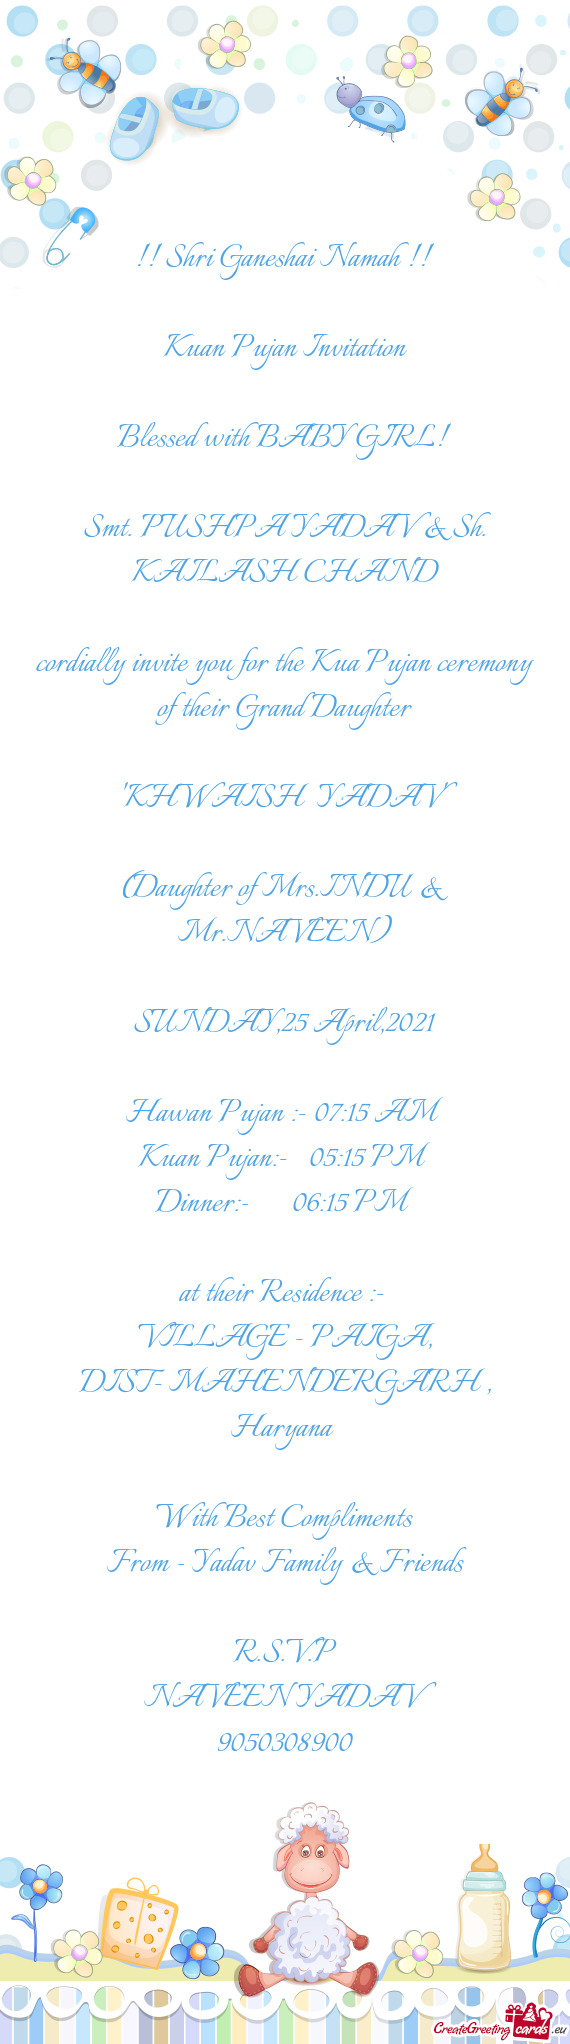 Cordially invite you for the Kua Pujan ceremony of their Grand Daughter